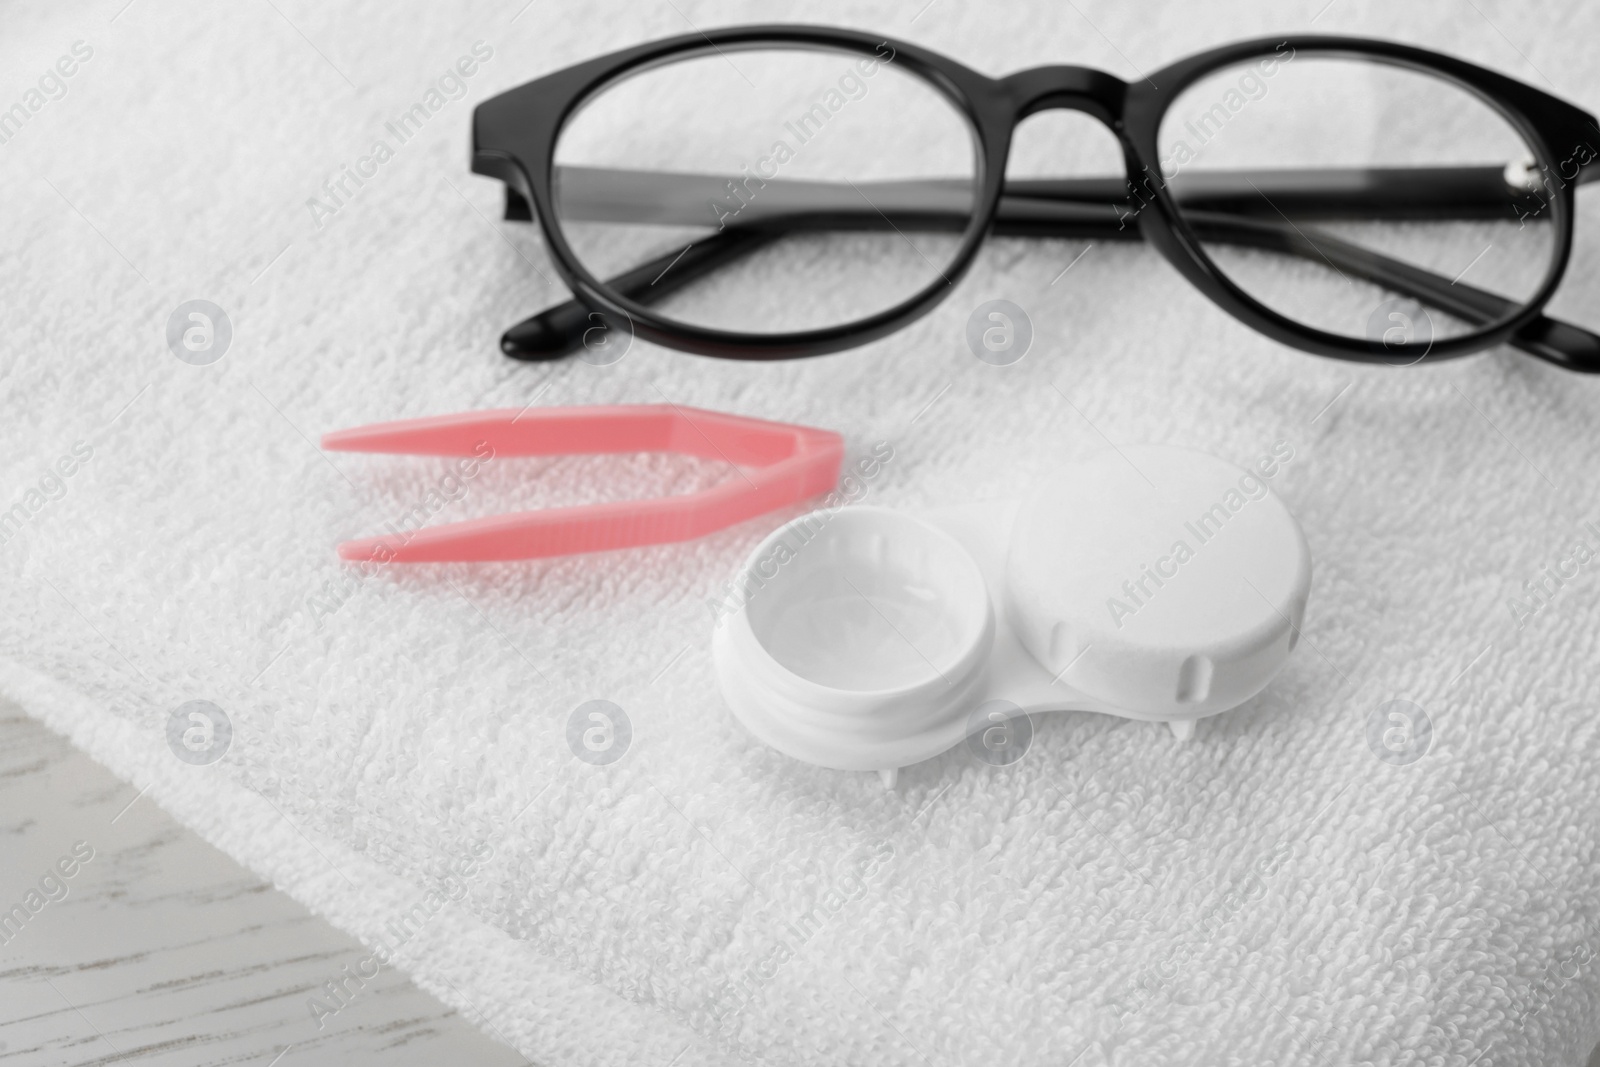 Photo of Case with contact lenses, tweezers, glasses and towel on white table, closeup